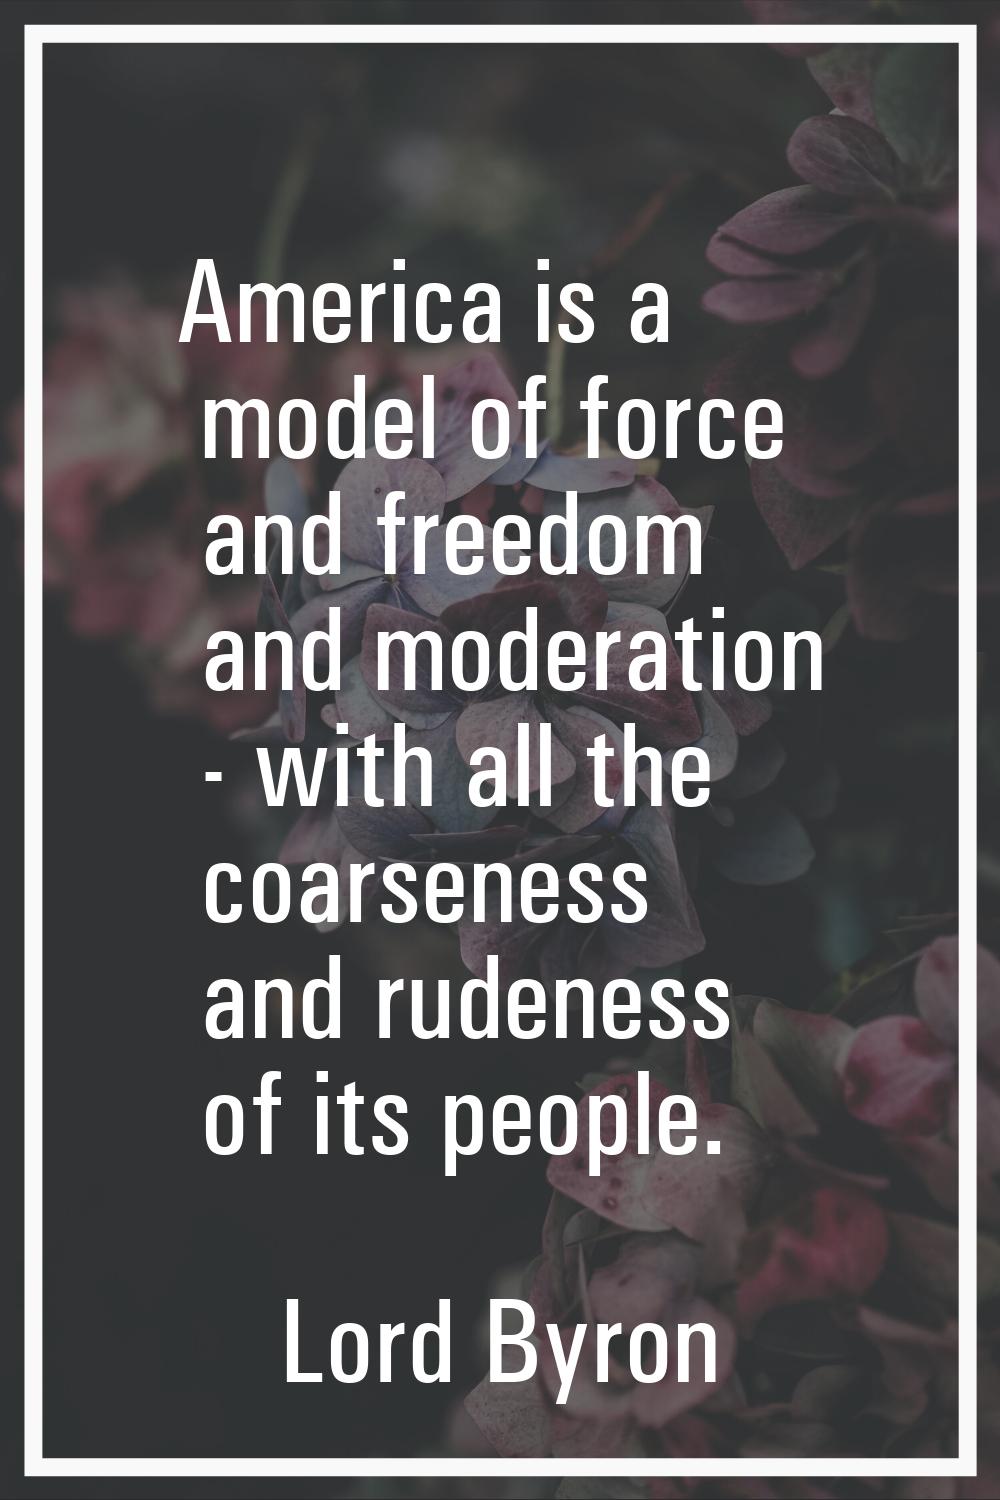 America is a model of force and freedom and moderation - with all the coarseness and rudeness of it